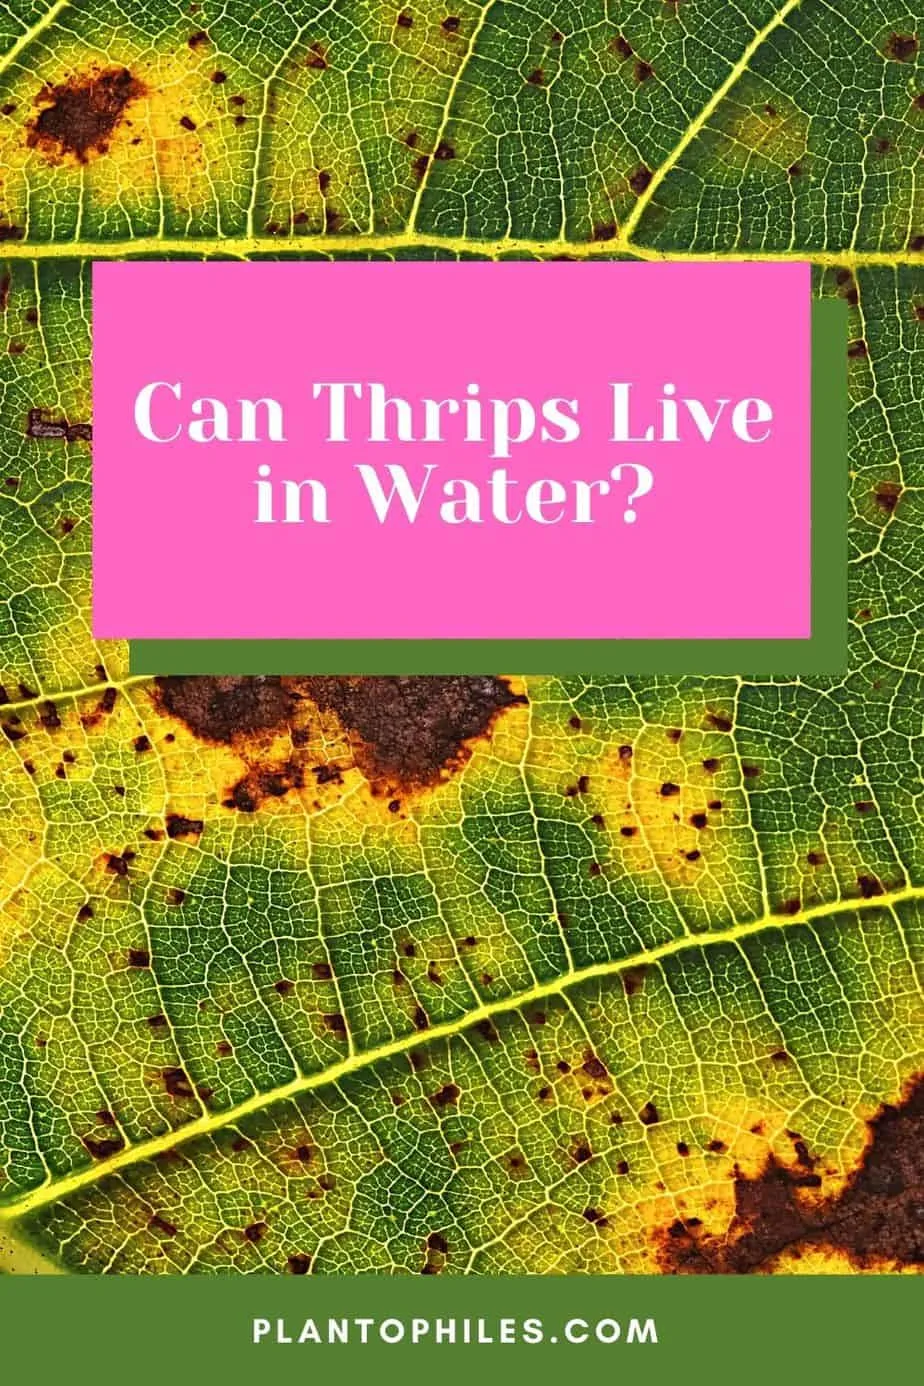 Can Thrips Live in Water?